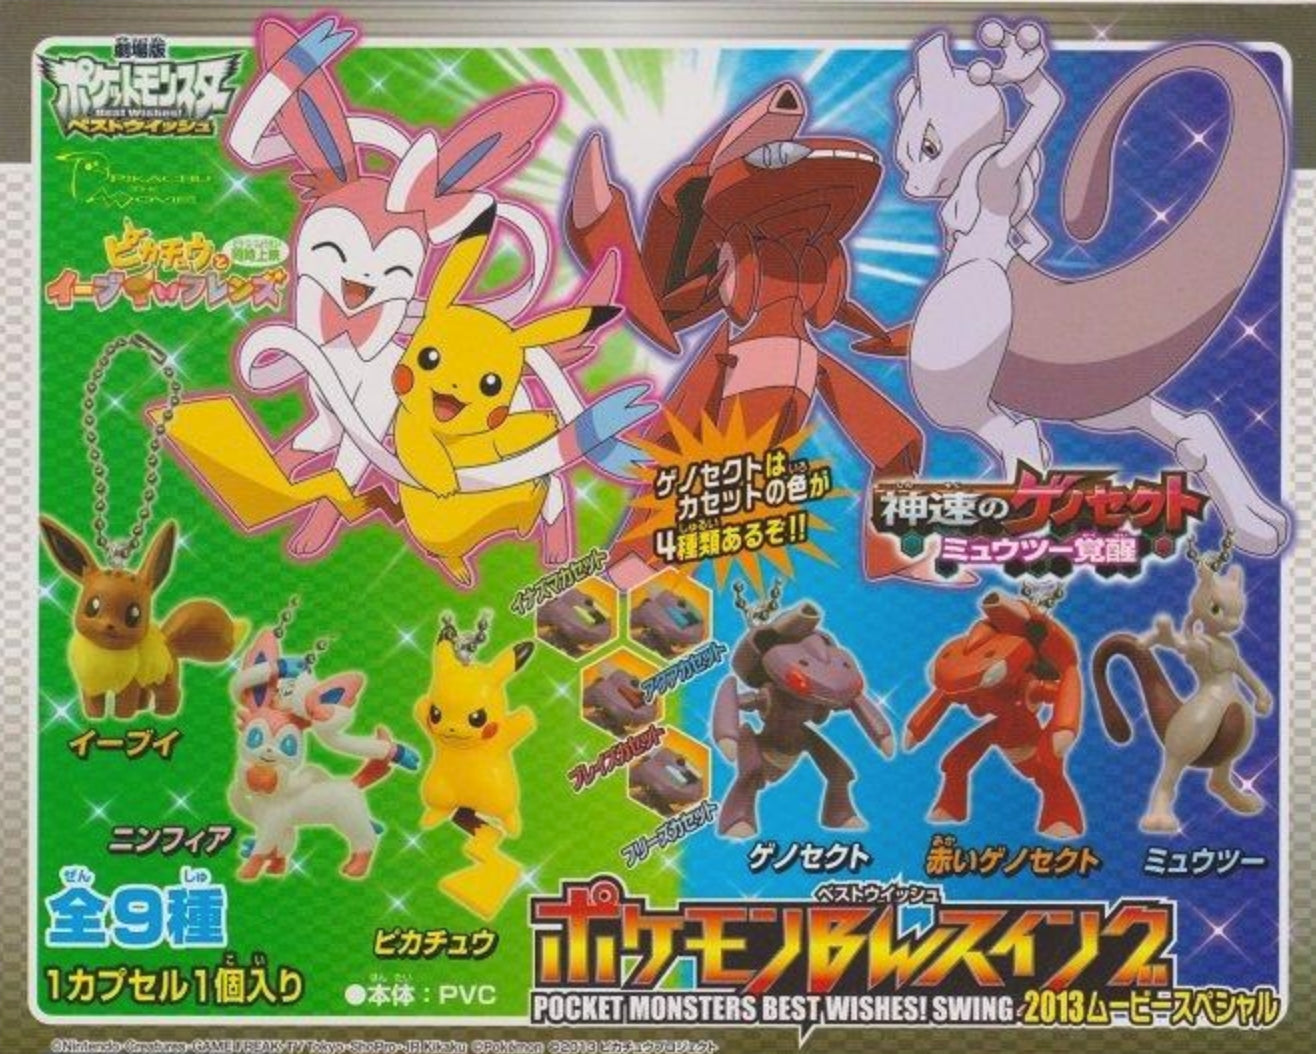 Bandai Pokemon Pocket Monster Best Wishes BW The Movie Swing 9 Collection Figure Set